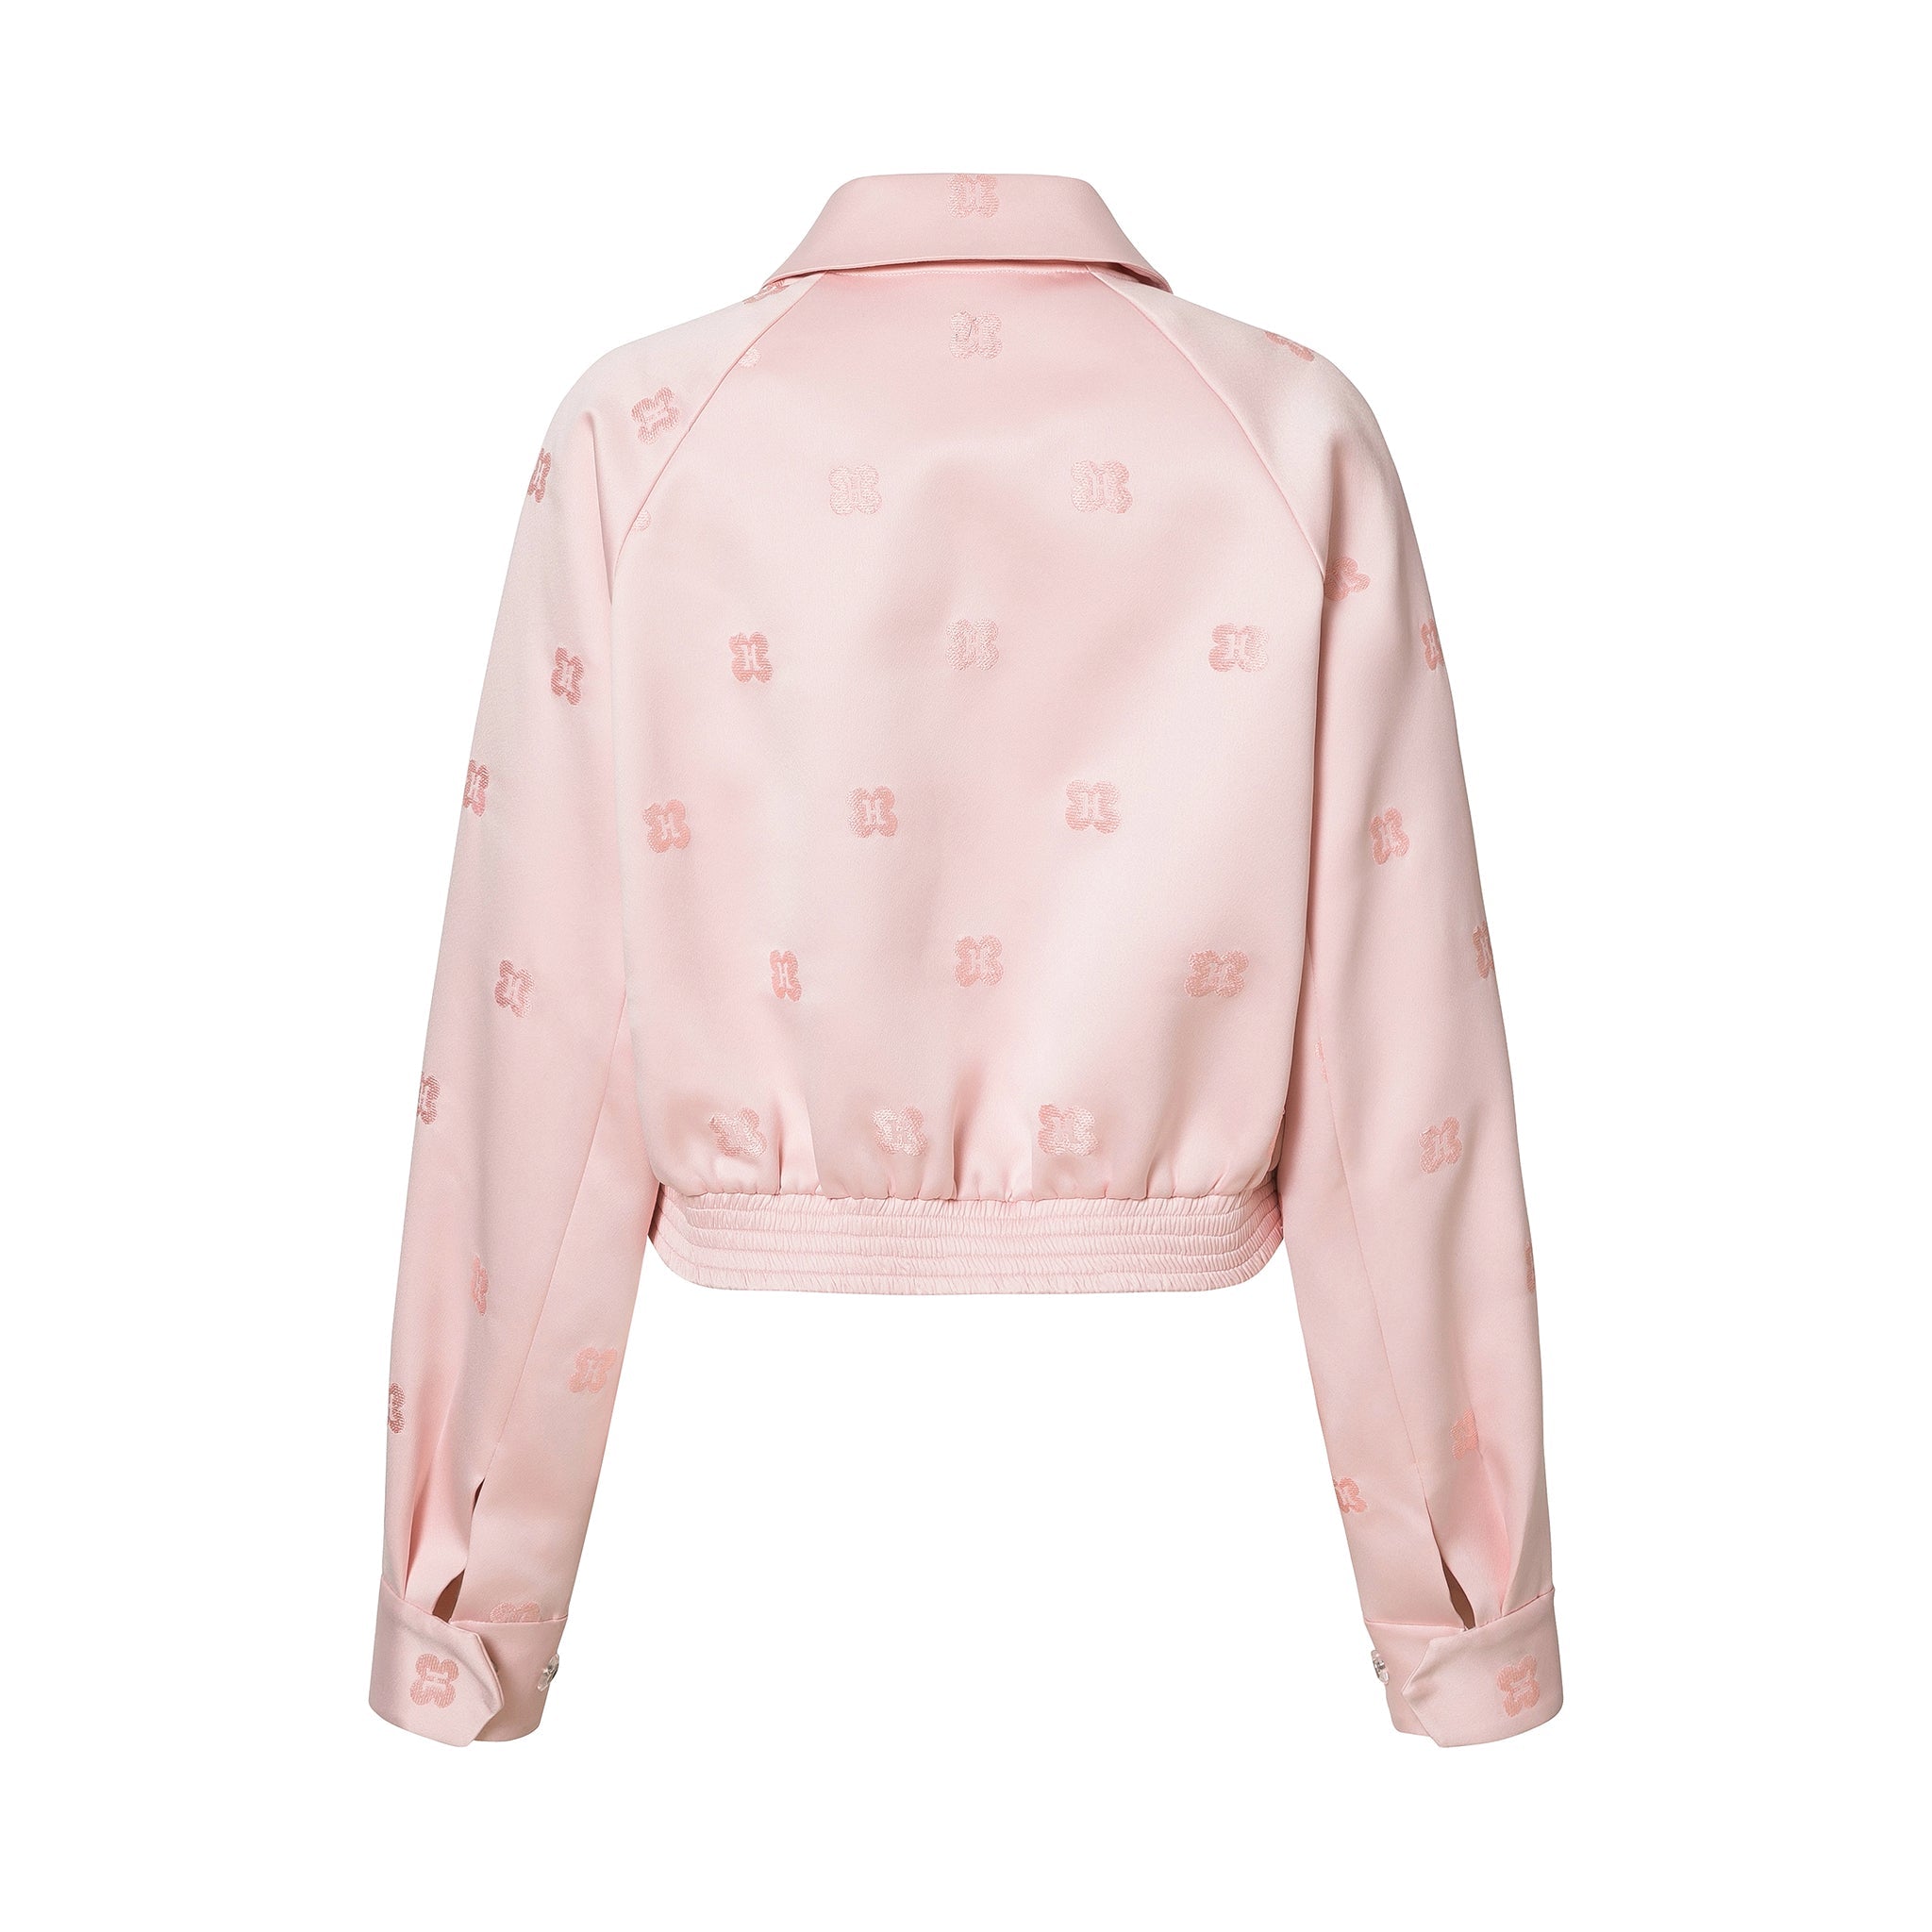 HERLIAN Pink Full Embroidery Floral Jacket | MADA IN CHINA